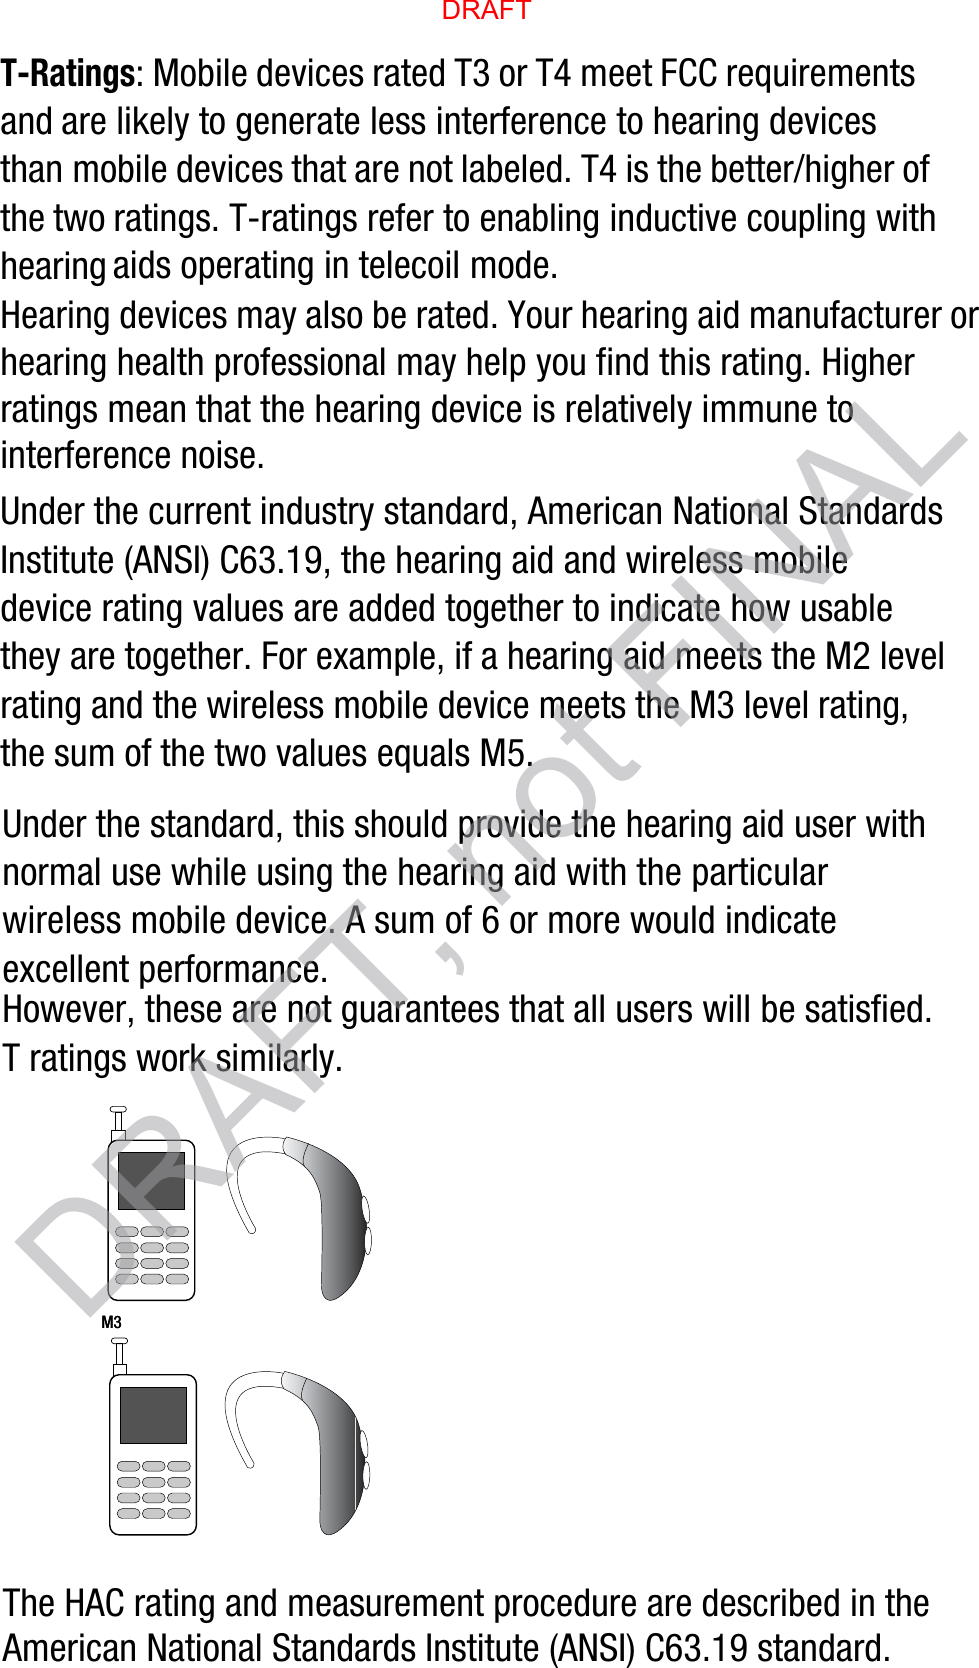 T-Ratings: Mobile devices rated T3 or T4 meet FCC requirements and are likely to generate less interference to hearing devices than mobile devices that are not labeled. T4 is the better/higher of the two ratings. T-ratings refer to enabling inductive coupling with hearing aids operating in telecoil mode.Hearing devices may also be rated. Your hearing aid manufacturer or hearing health professional may help you find this rating. Higher ratings mean that the hearing device is relatively immune to interference noise. Under the current industry standard, American National Standards Institute (ANSI) C63.19, the hearing aid and wireless mobile device rating values are added together to indicate how usable they are together. For example, if a hearing aid meets the M2 level rating and the wireless mobile device meets the M3 level rating, the sum of the two values equals M5. Under the standard, this should provide the hearing aid user with normal use while using the hearing aid with the particular wireless mobile device. A sum of 6 or more would indicate excellent performance.  However, these are not guarantees that all users will be satisfied. T ratings work similarly.The HAC rating and measurement procedure are described in the American National Standards Institute (ANSI) C63.19 standard.    M3       M3        DRAFT, not FINALDRAFT